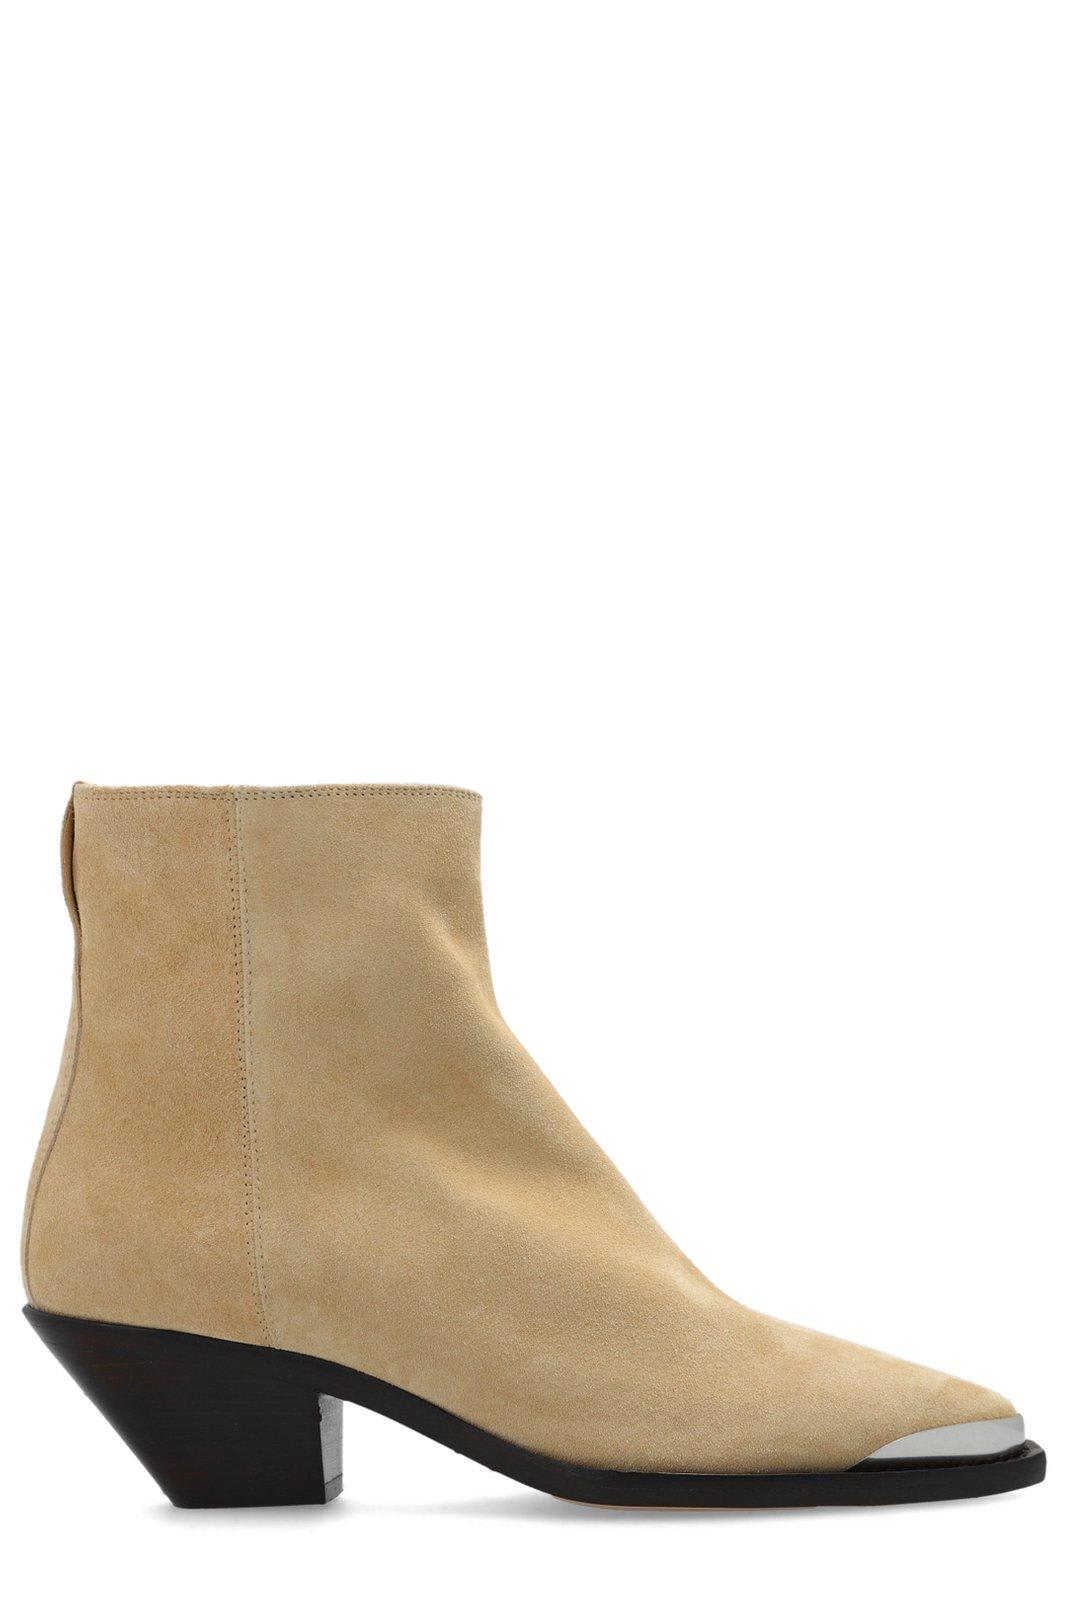 ISABEL MARANT POINTED TOE ZIPPED ANKLE BOOTS